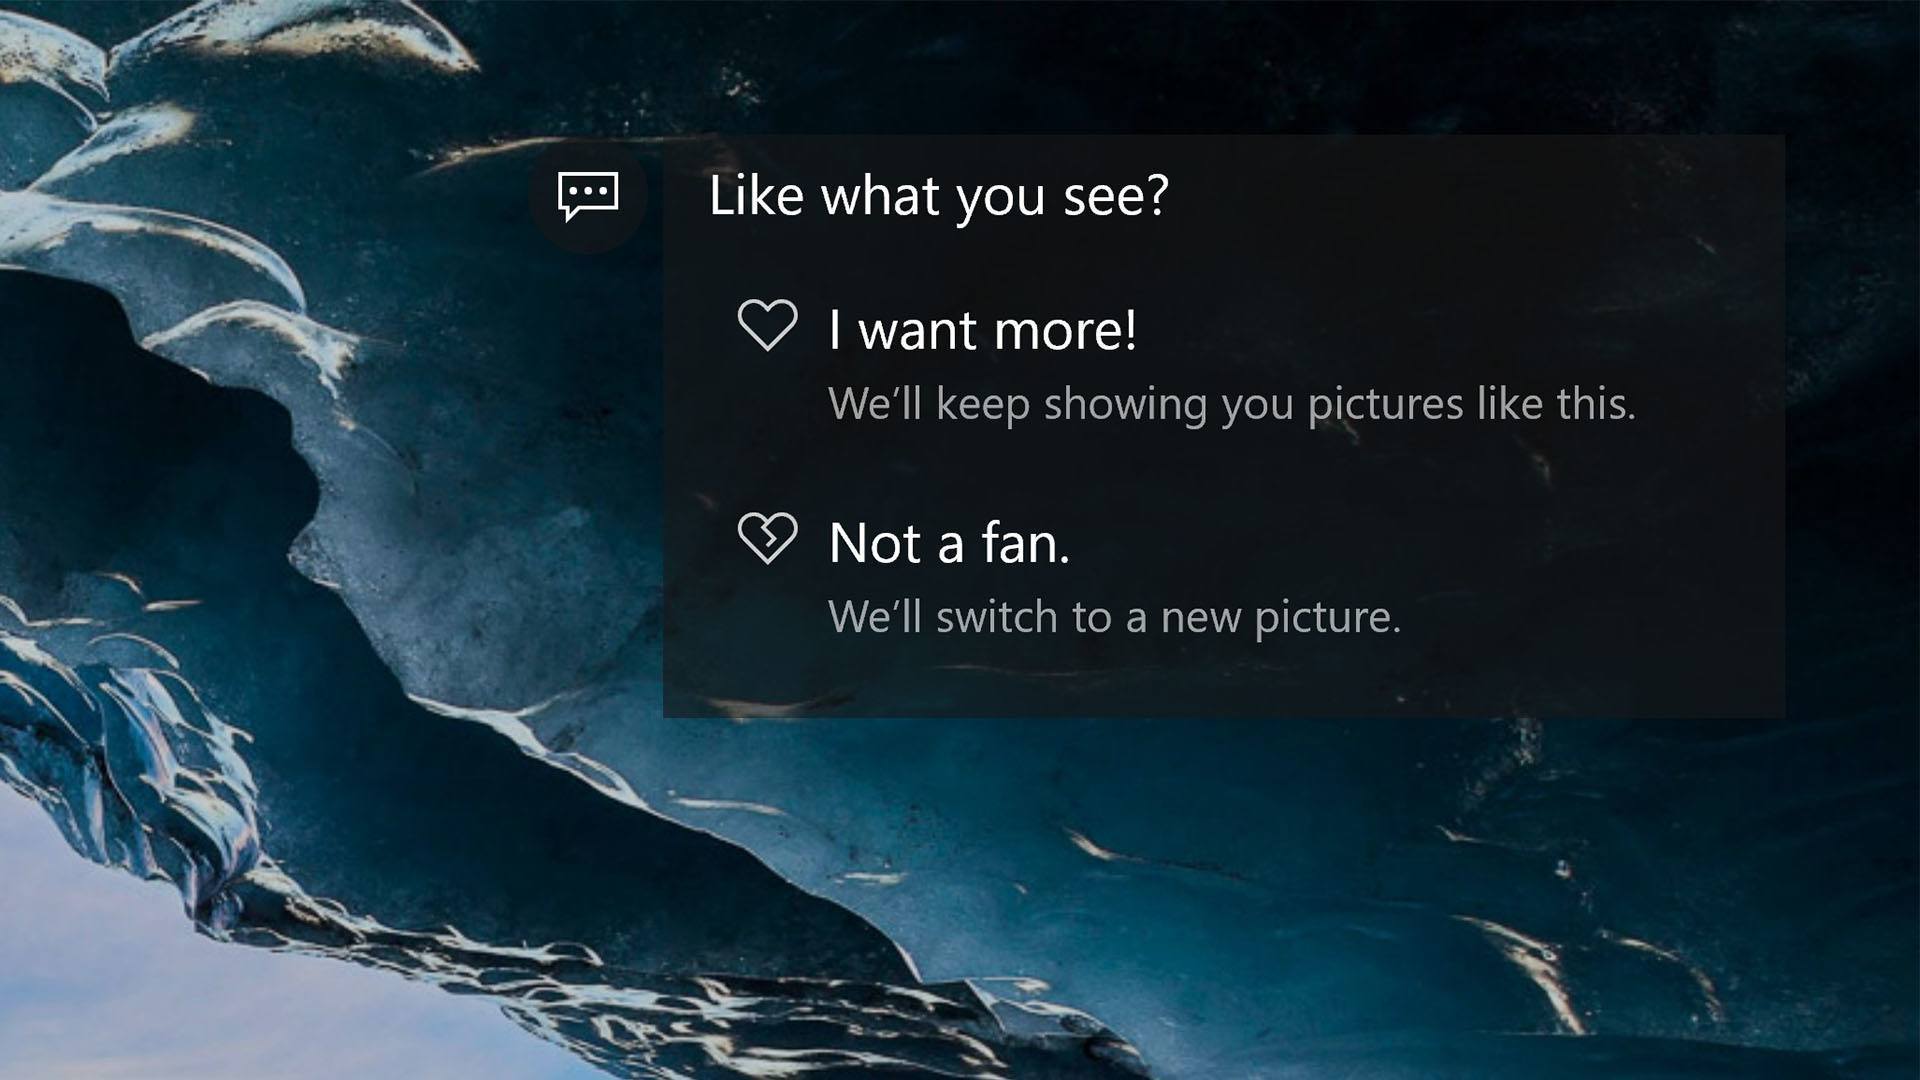 How to Find Windows Spotlight Lock Screen Images in Windows 10 1920x1080